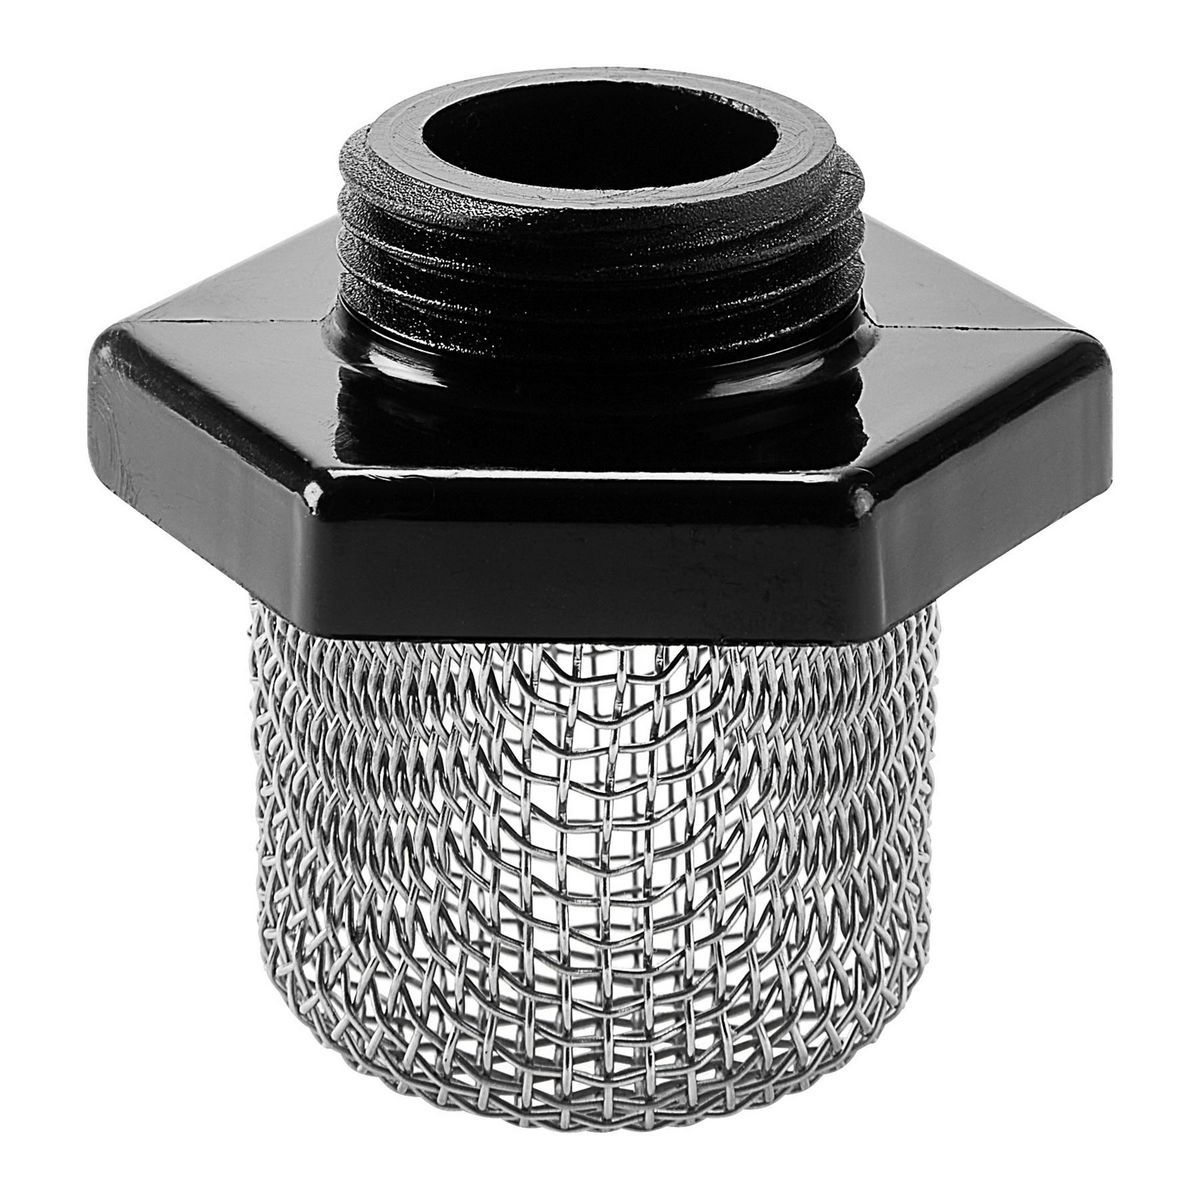 Pro Inlet Strainer for Floor Based Airless Paint and Stain Sprayers